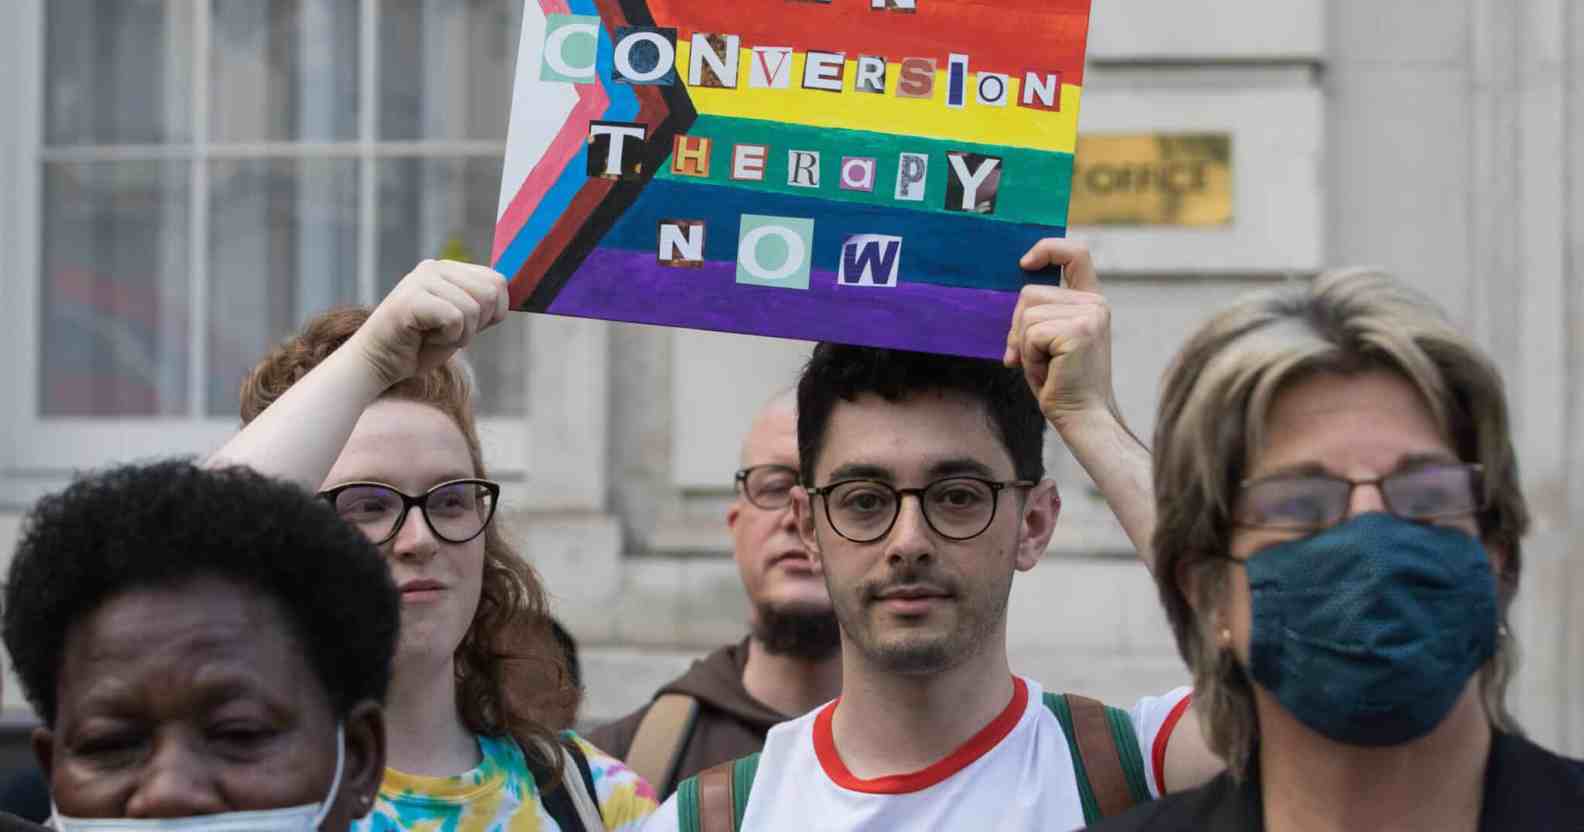 Ban Conversion Therapy Picket Of Cabinet Office London